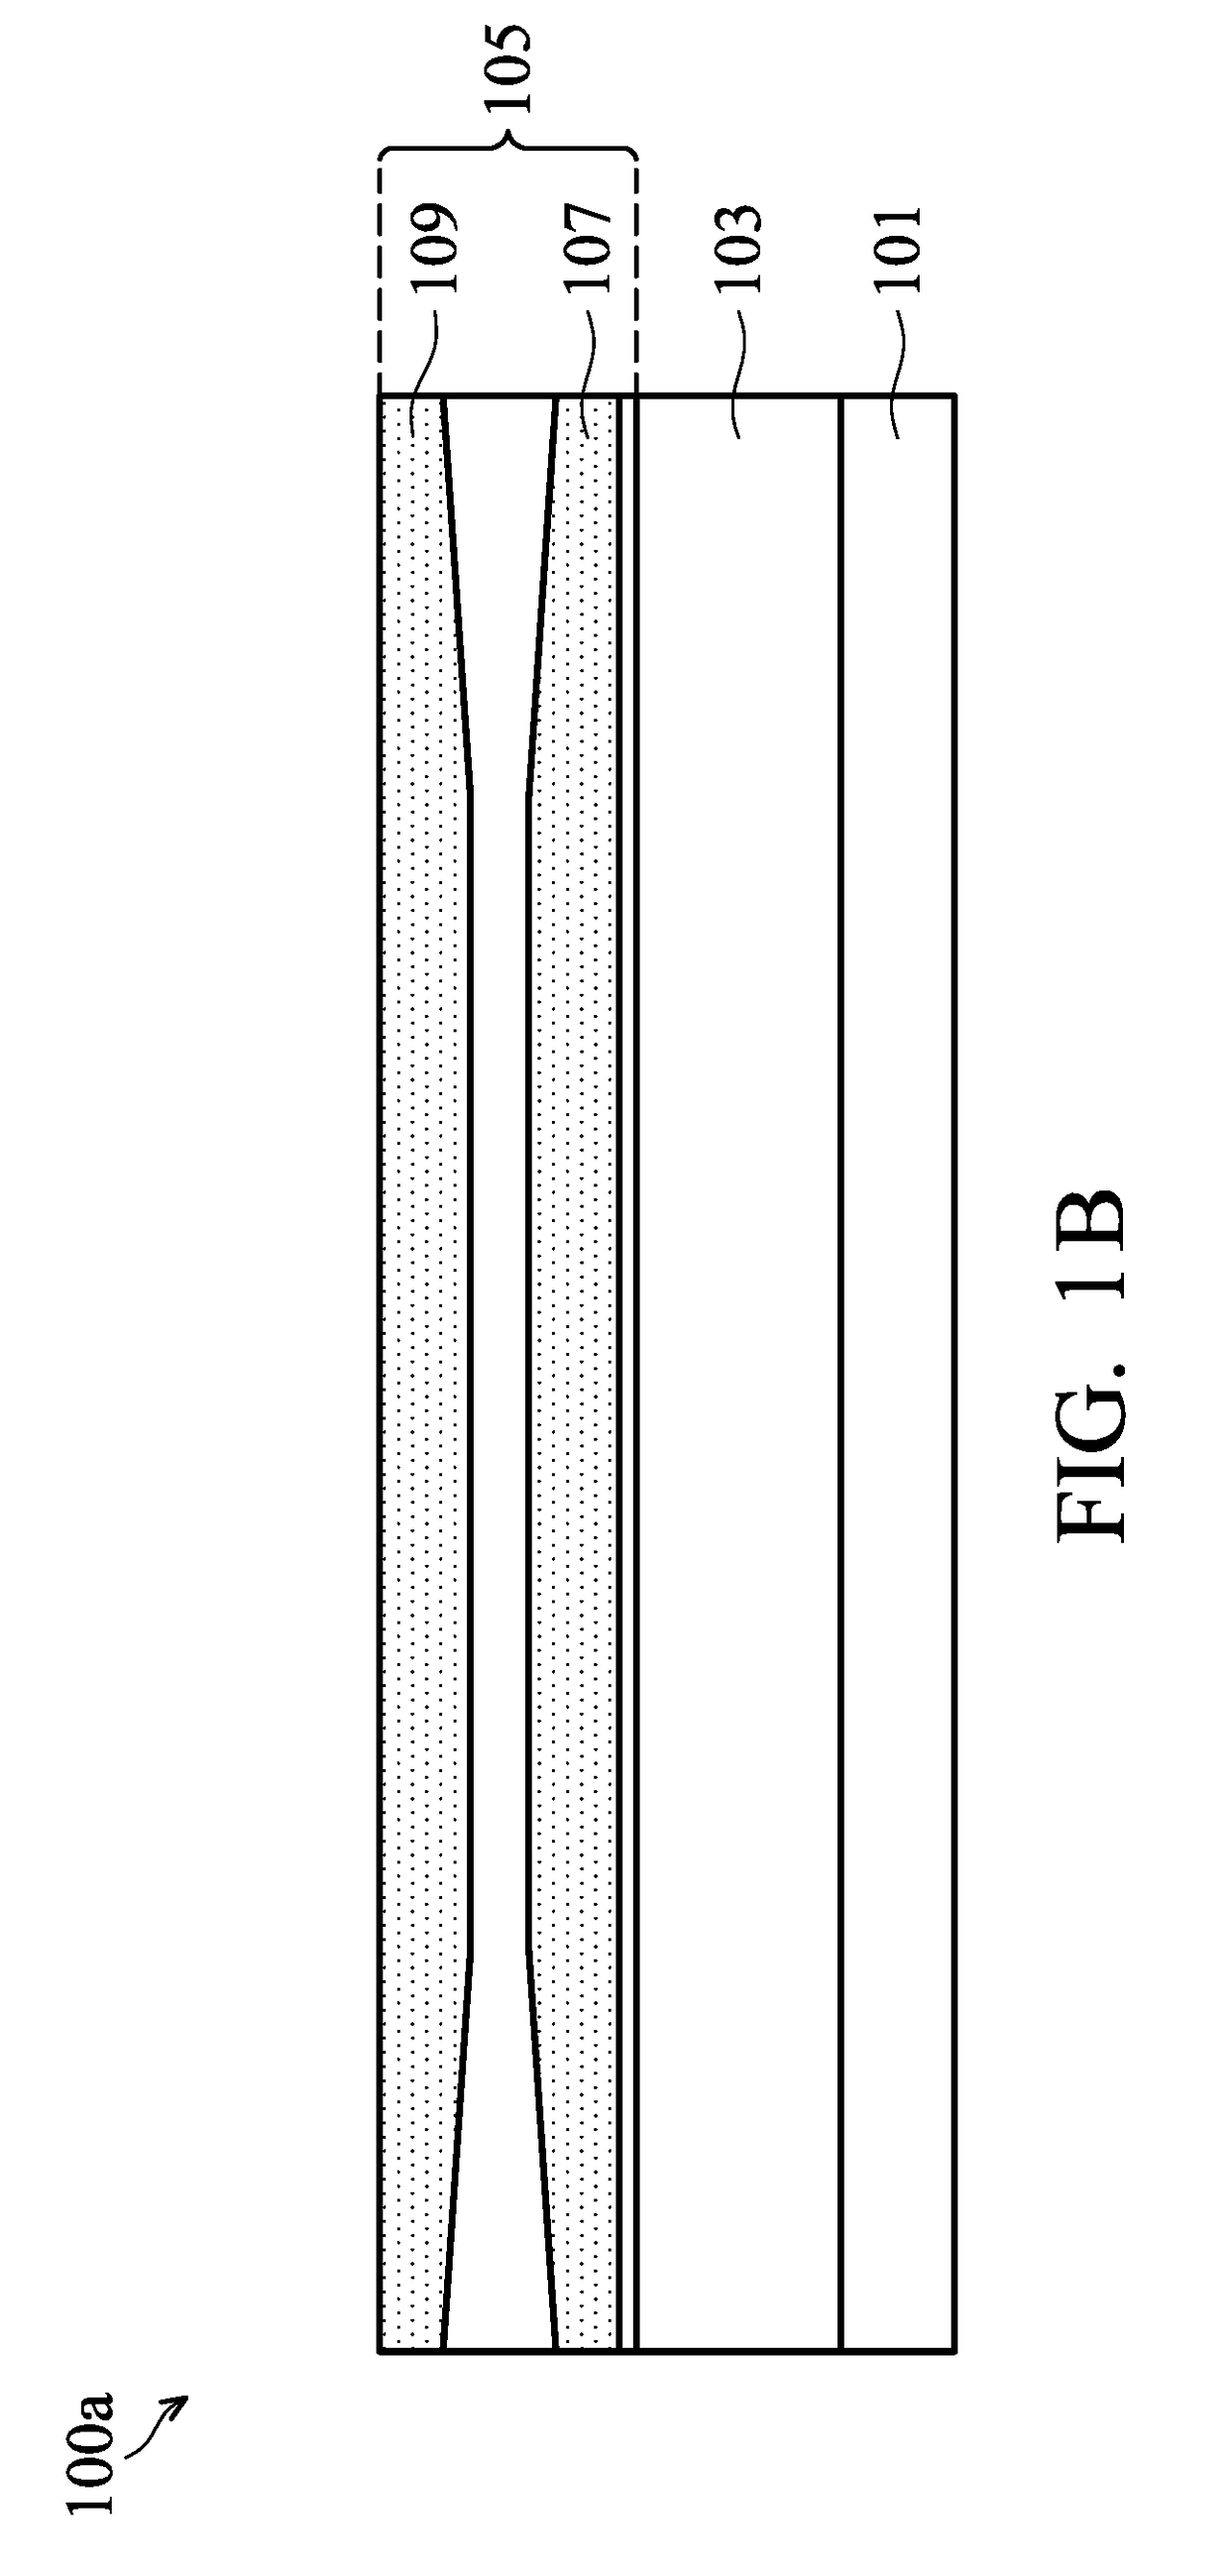 Semiconductor substrate structures, semiconductor devices and methods for forming the same